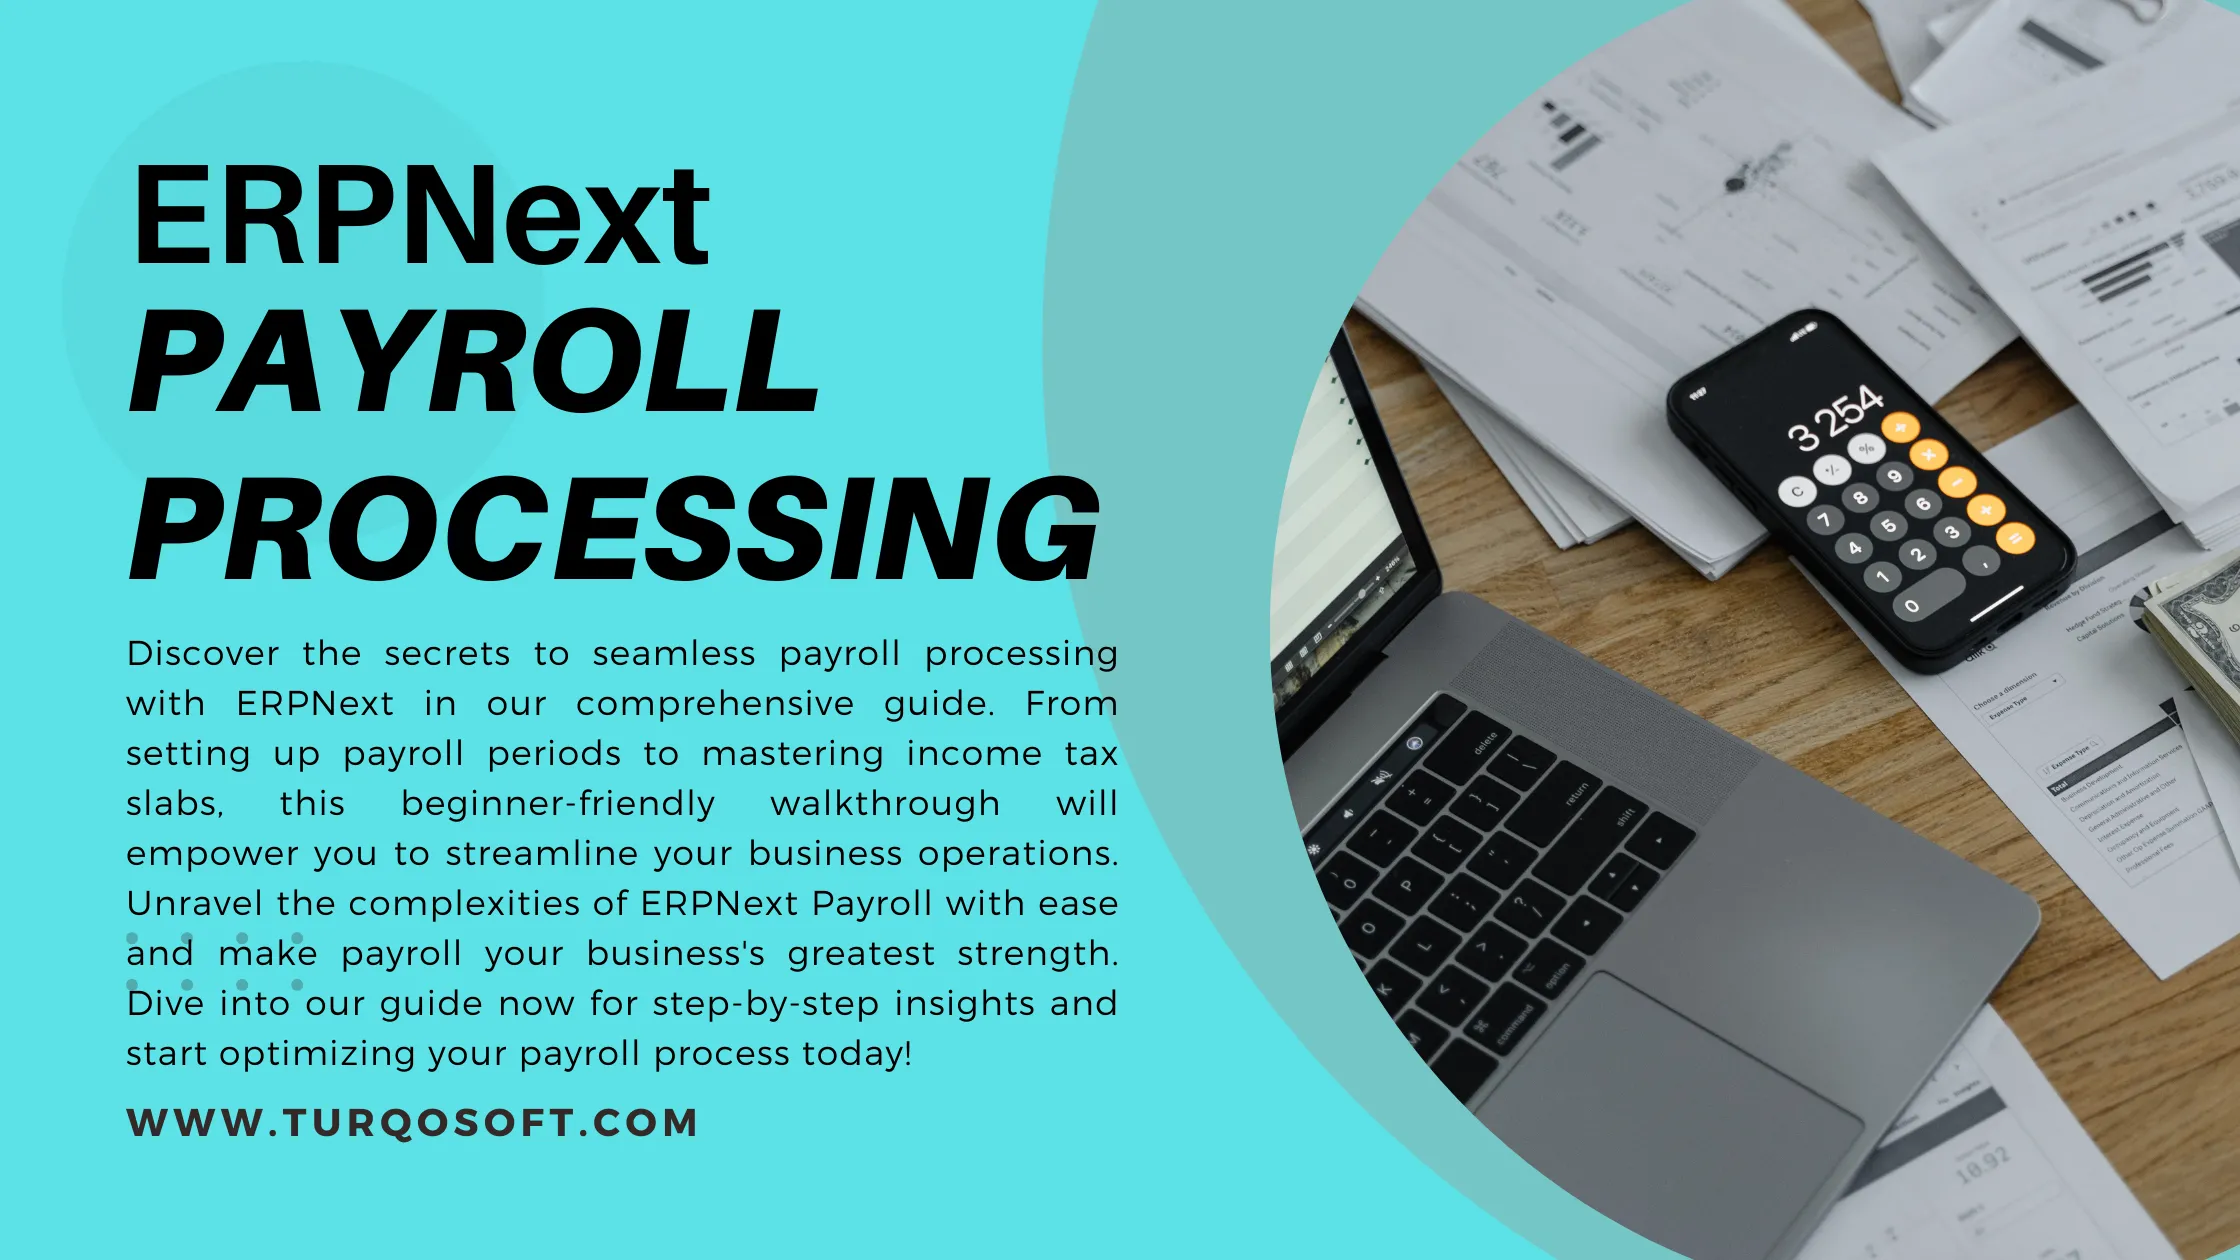 ERPNext Payroll Processing: A Step-by-Step Guide for Effortless Implementation